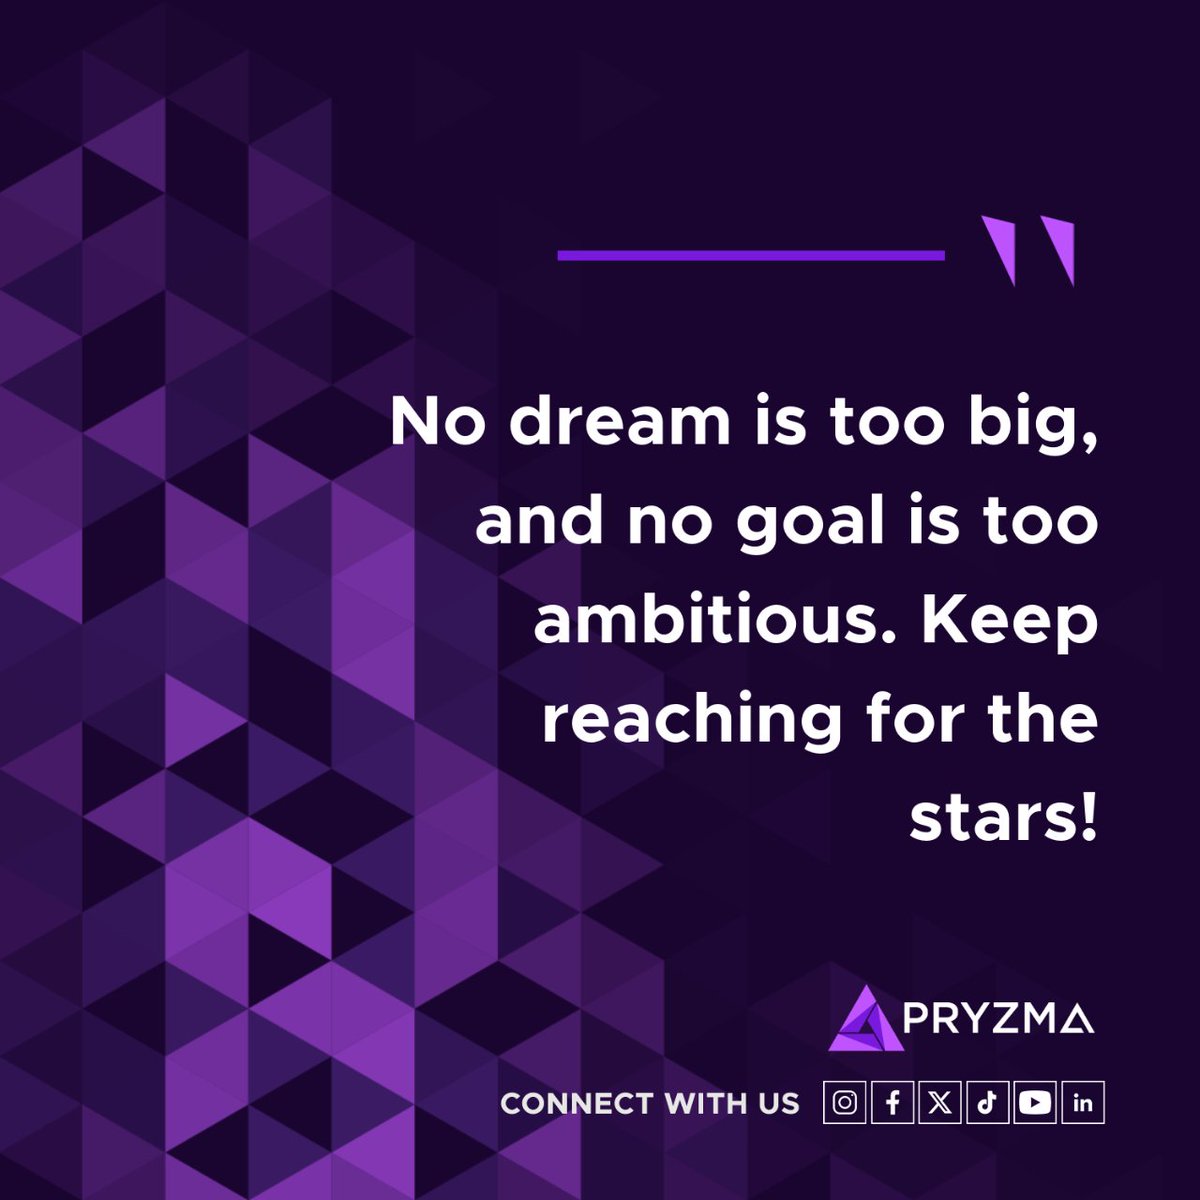 Don't let anyone tell you your goals are too ambitious. Let your dreams be your guide as you reach for the stars. 

#smallbusiness #businessgrowth #ecommerce #ecommercebusiness #businessmotivation #amazonfba #amazonseller #ebayseller #walmartseller #pryzma